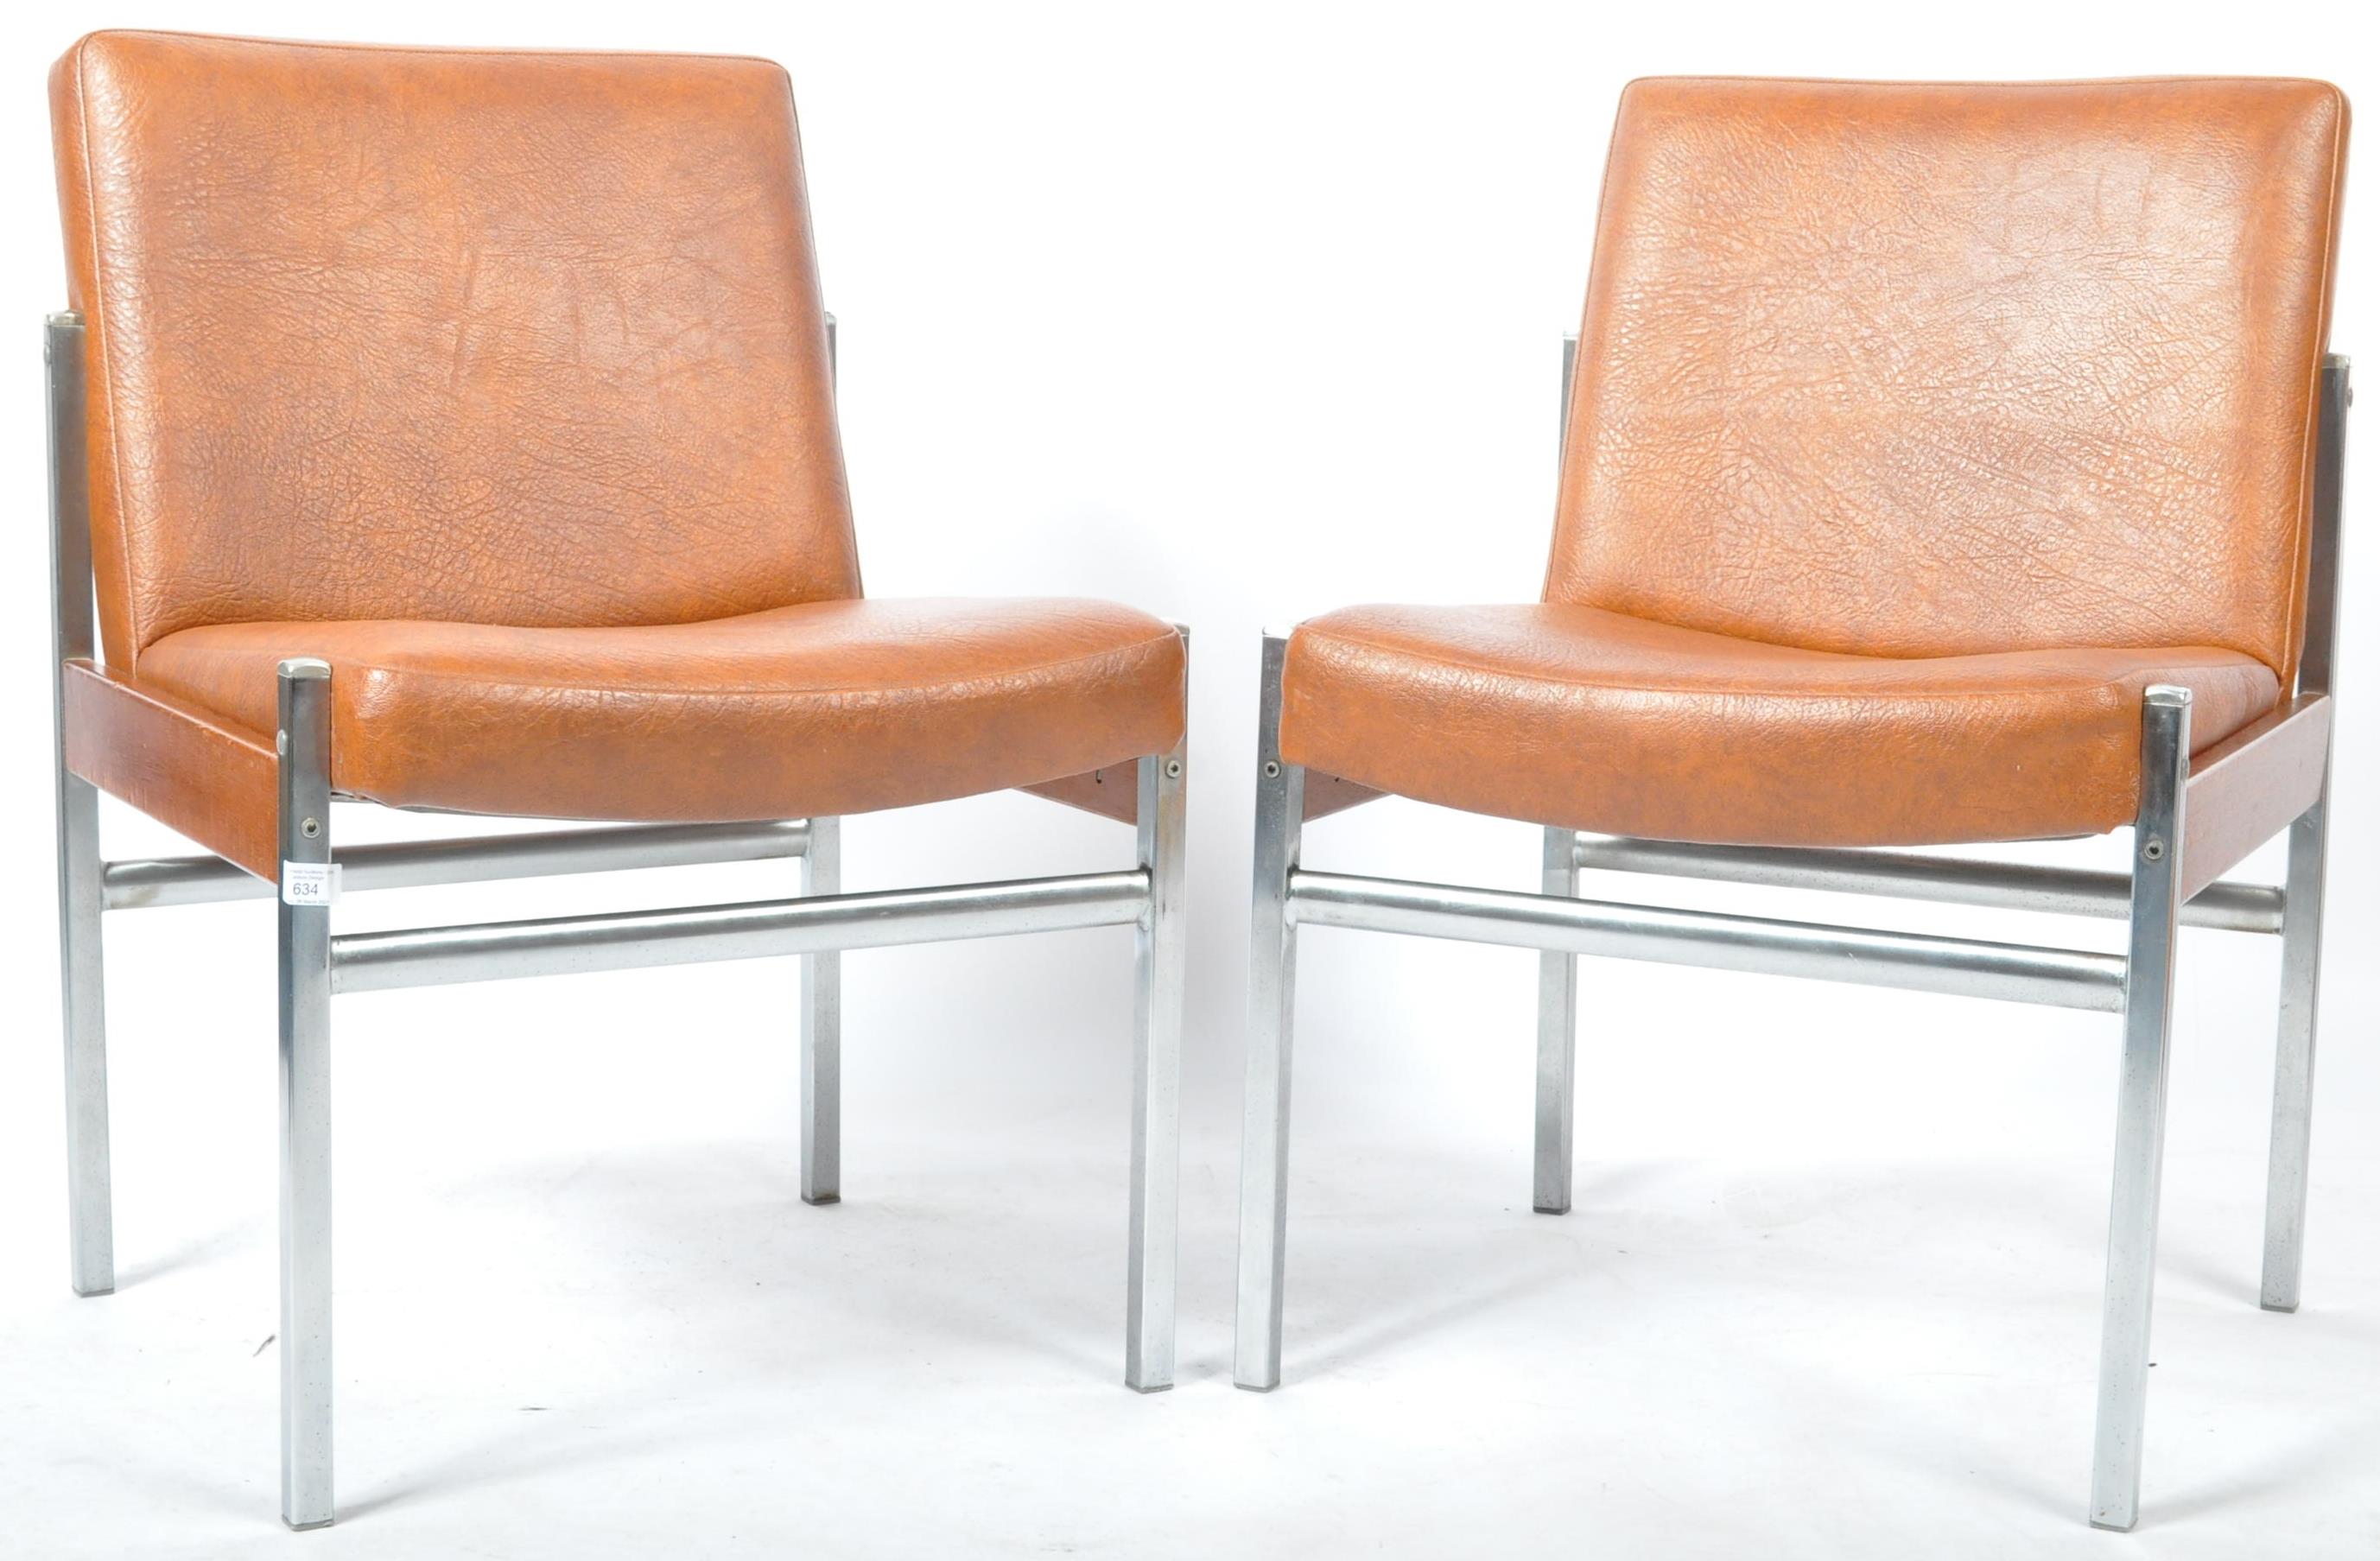 ANTOCKS LAIRN - PAIR OF CHROME AND LEATHER SIDE CHAIRS